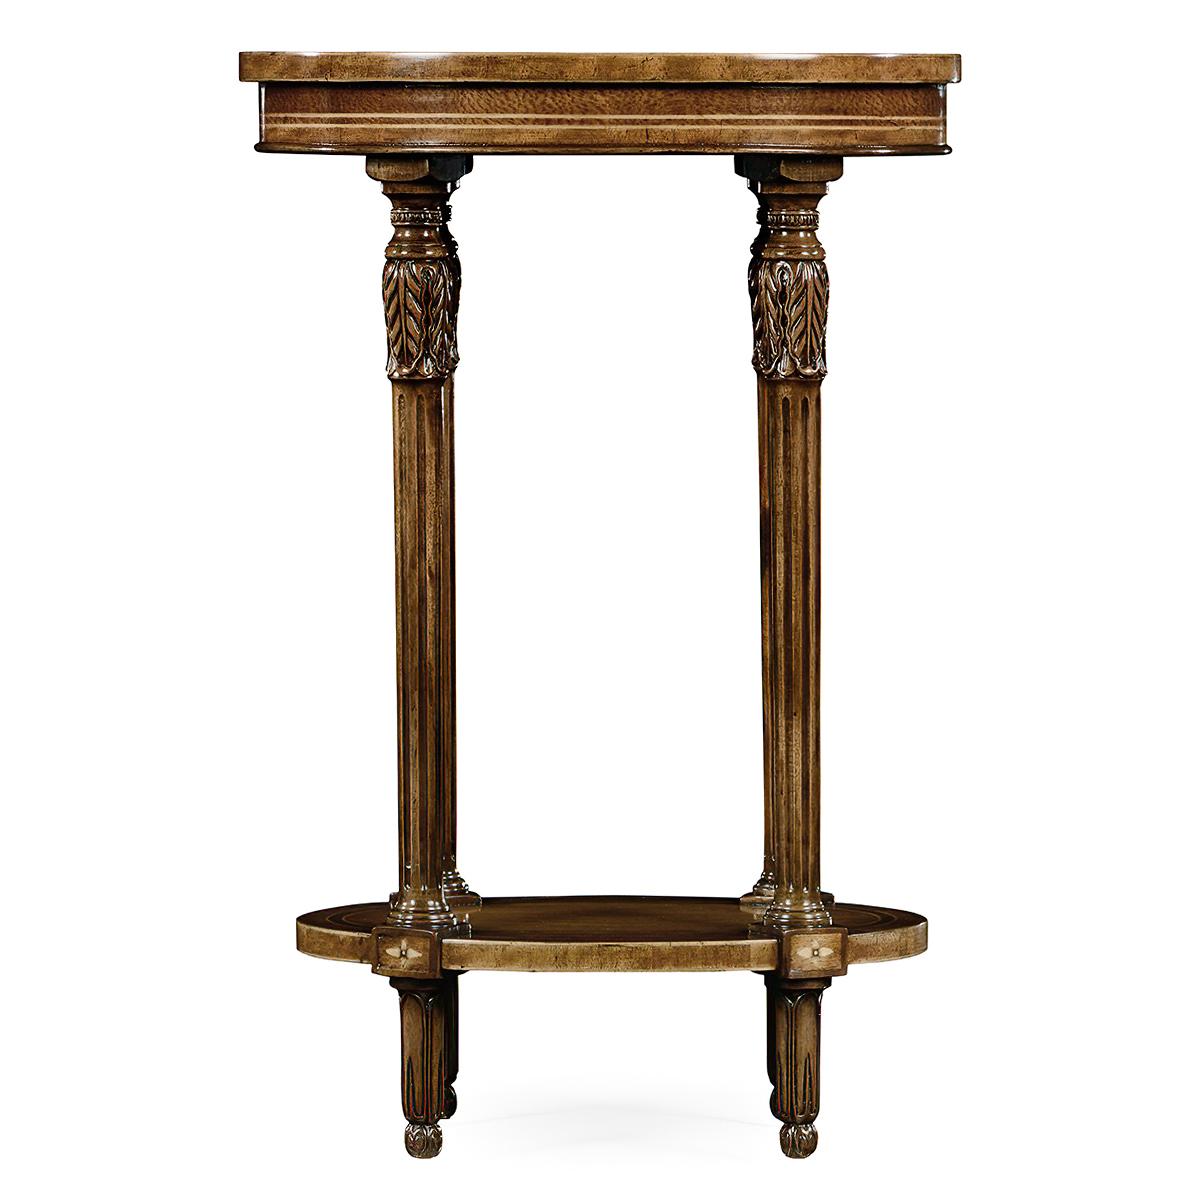 Elegant George III style oval two-tier wine table with fine crossbanded inlays and delicate carving to the fluted columns with oval shelf stretcher. 

Dimensions: 17.75